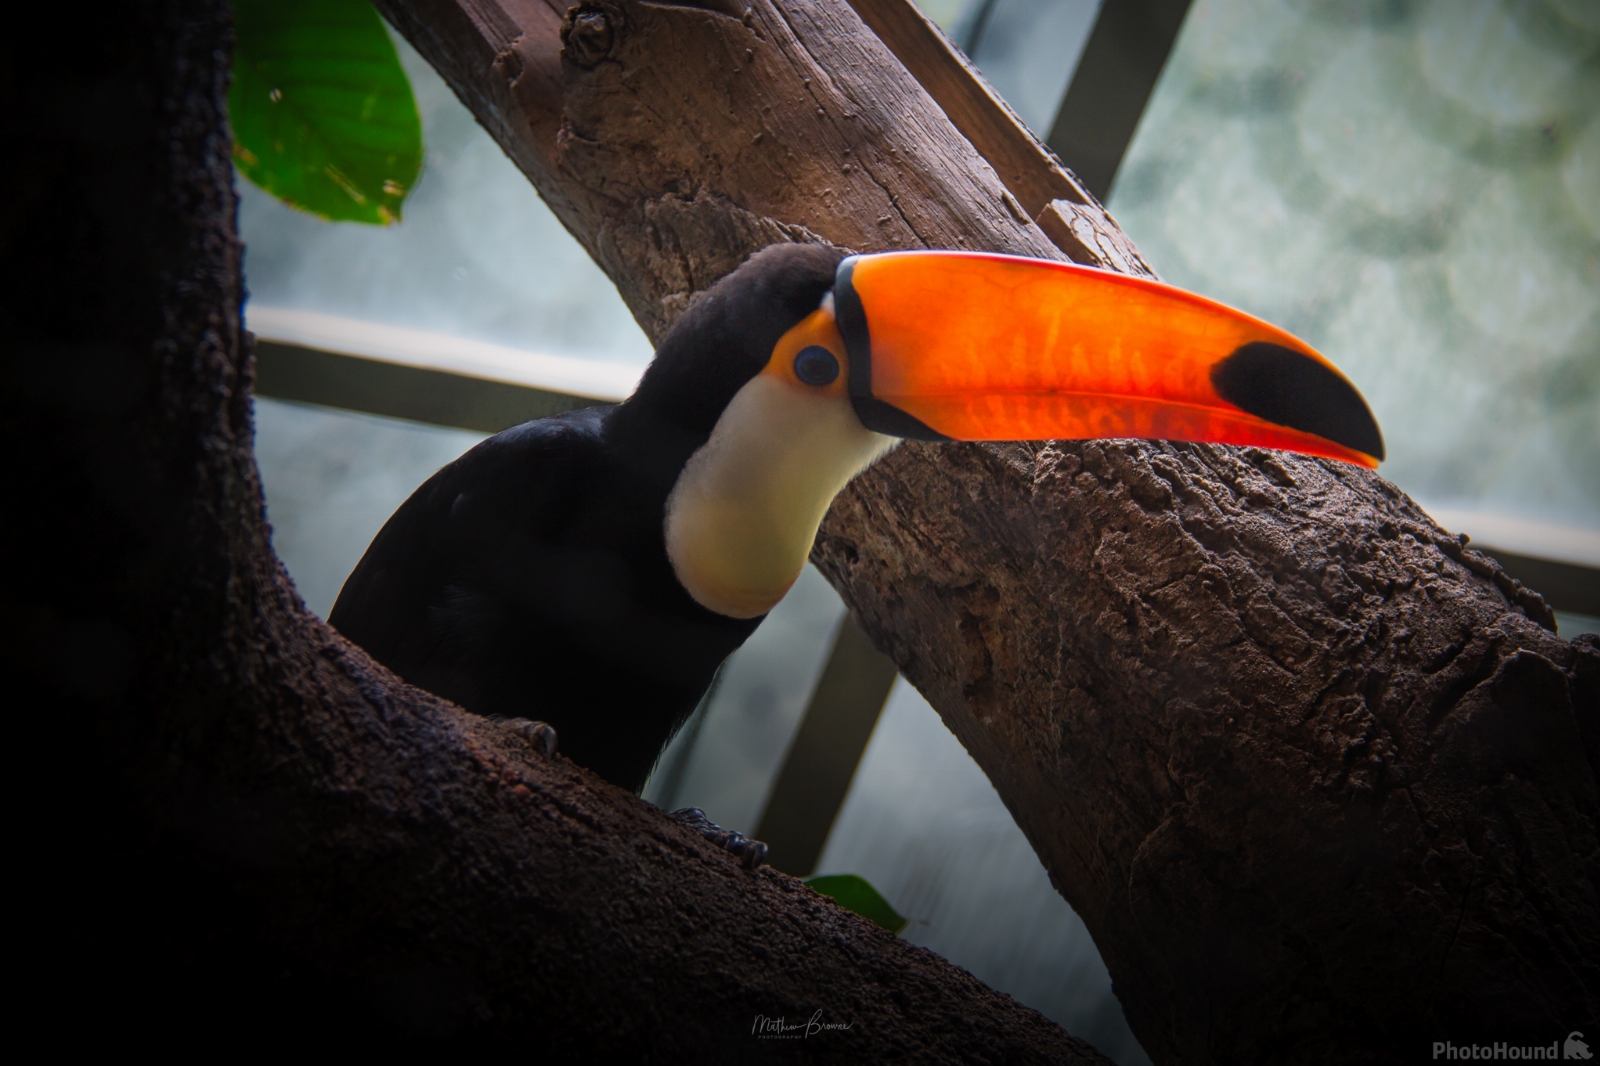 Image of Woodland Park Zoo by Mathew Browne